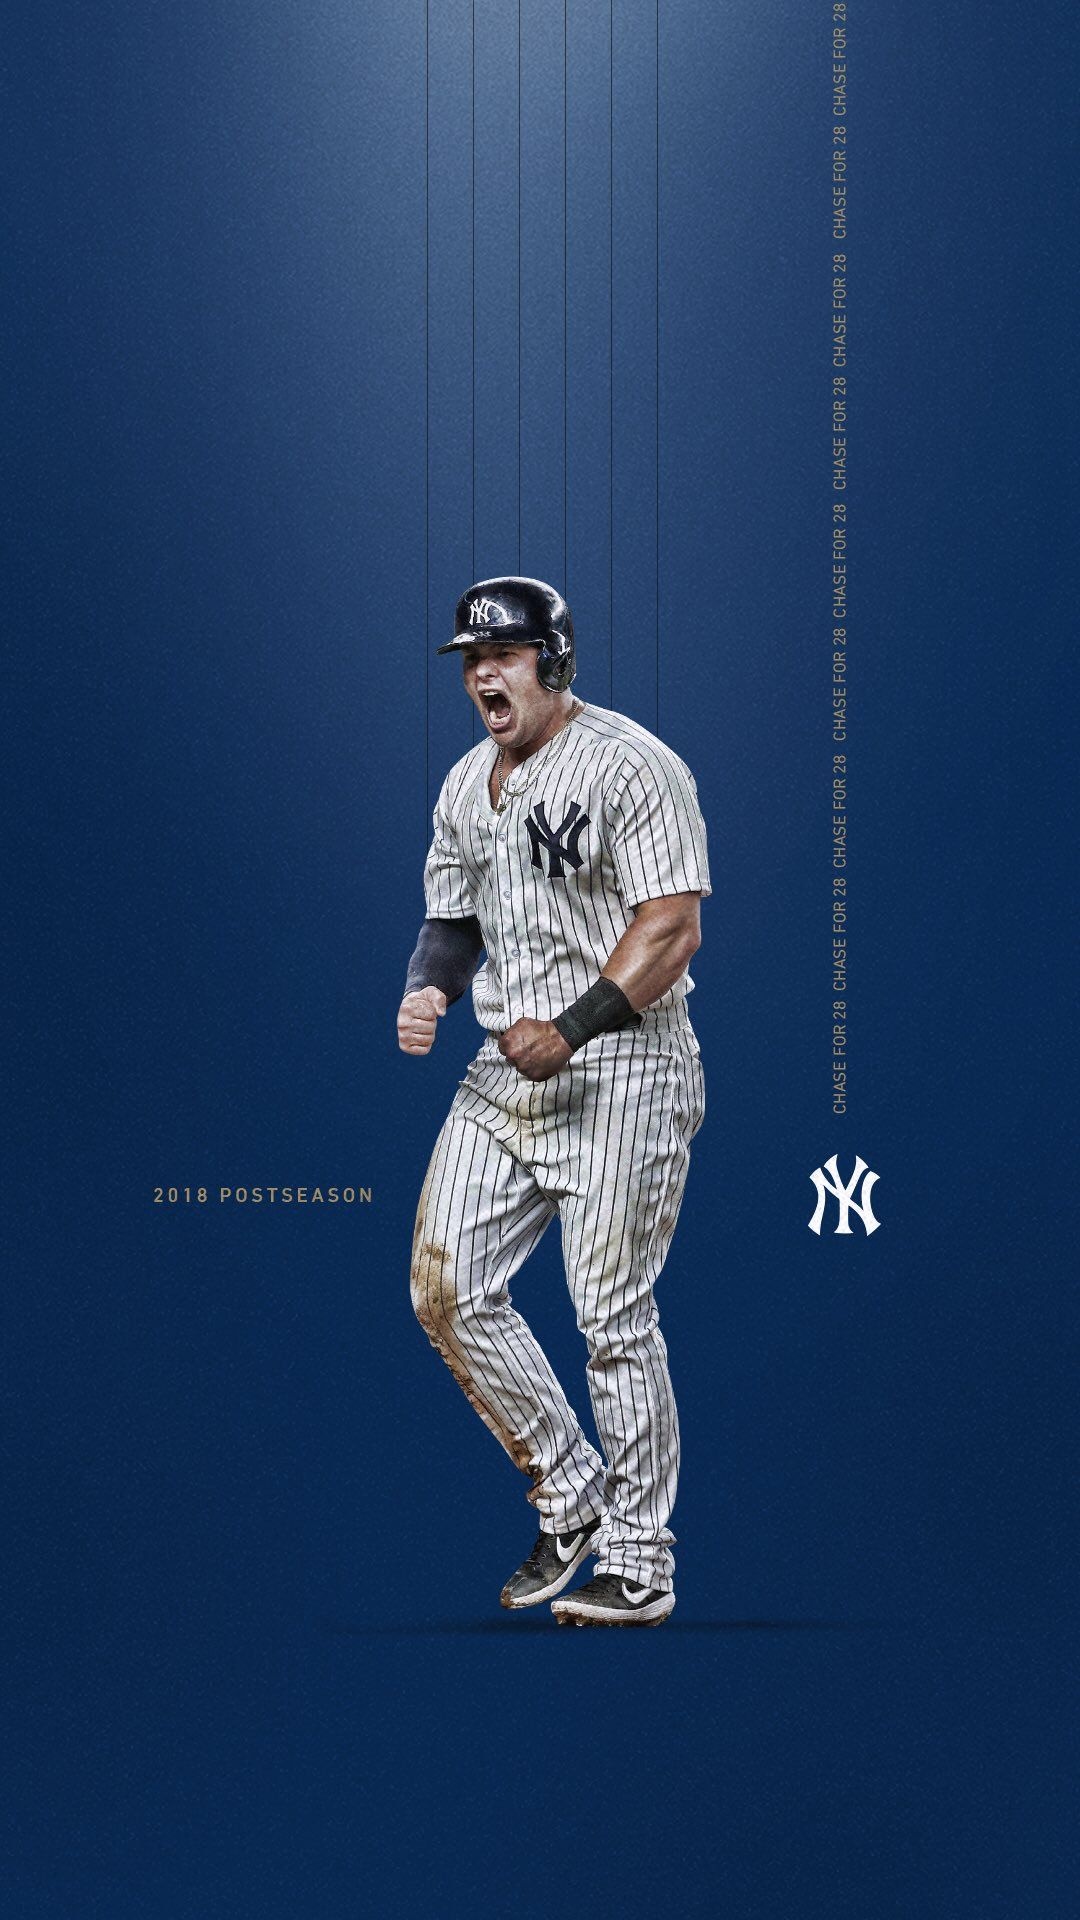 New York Yankees: American sports team playing in the American League East. 1080x1920 Full HD Wallpaper.